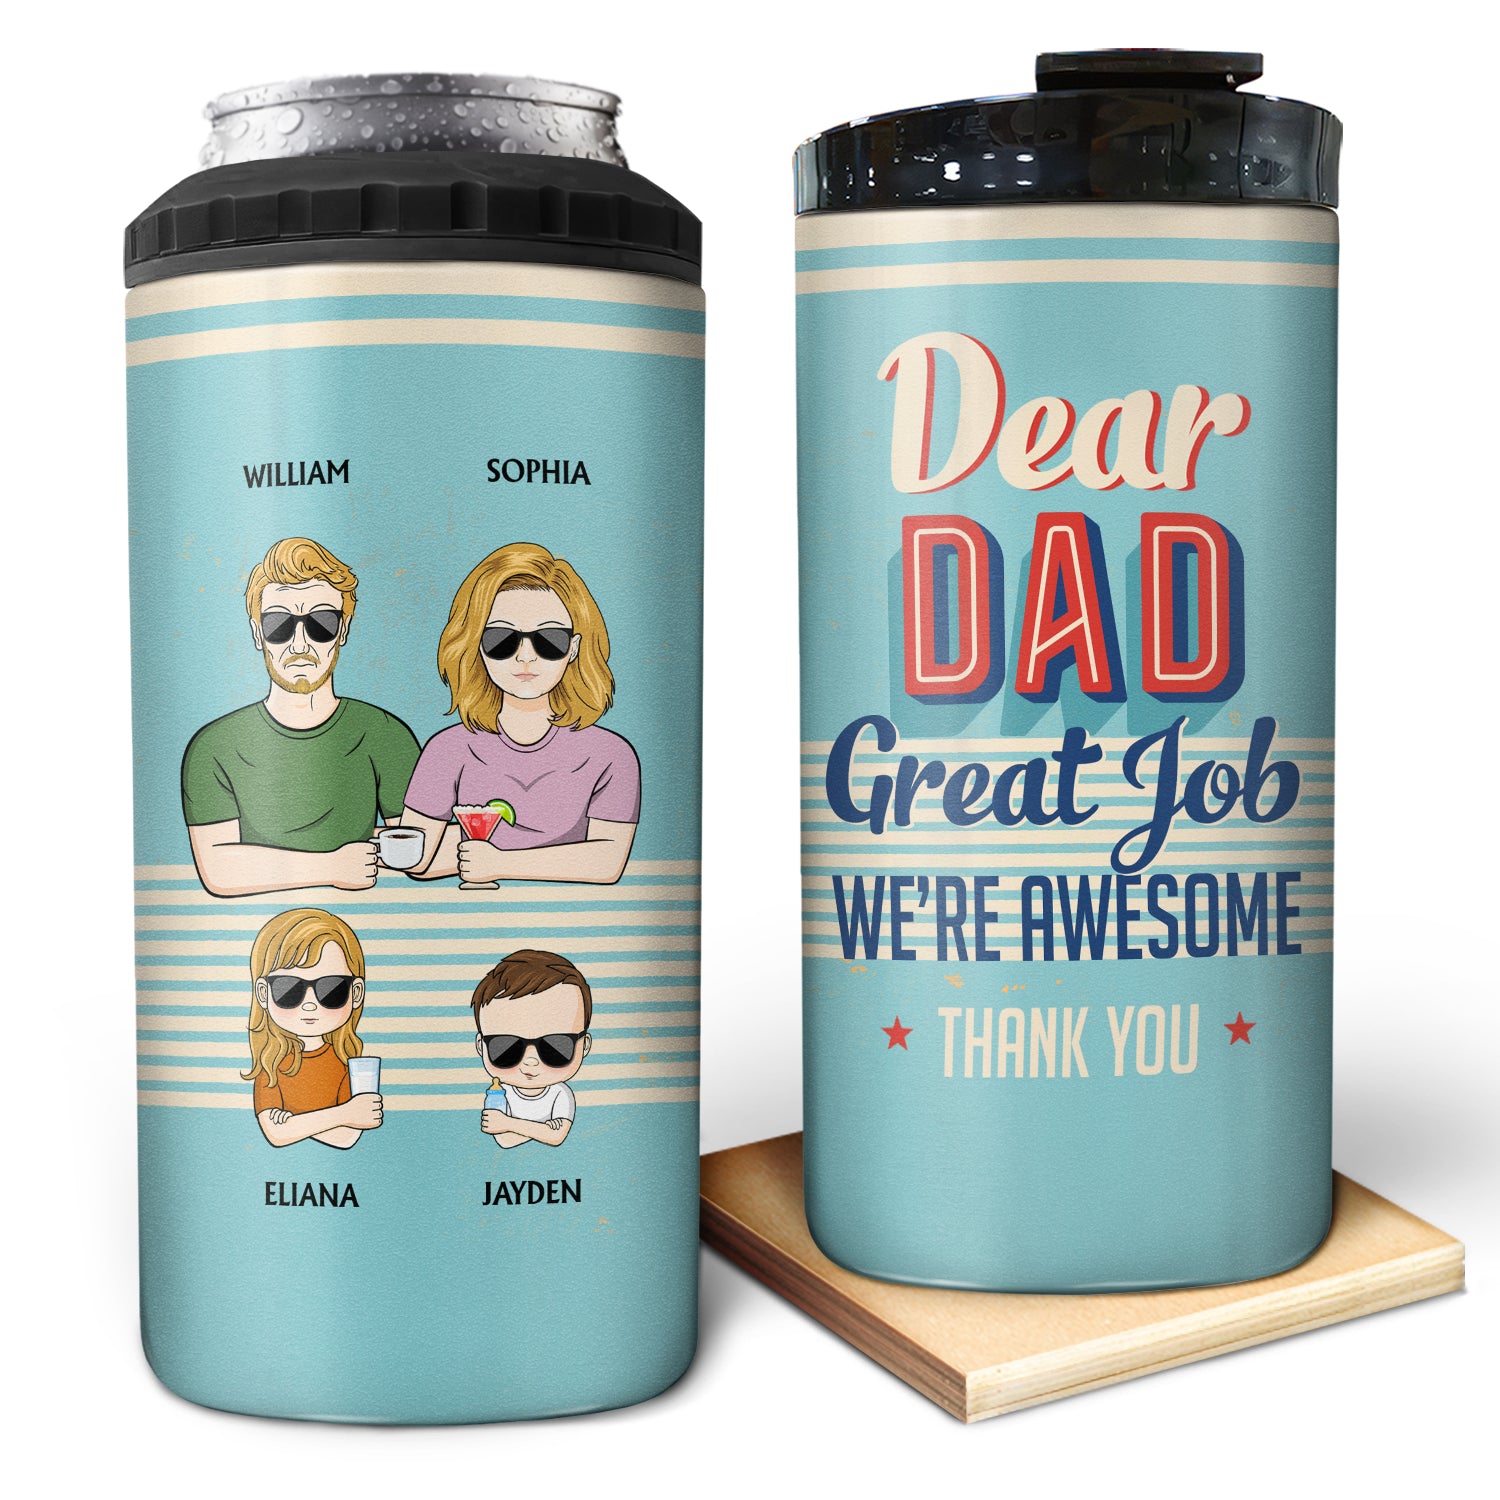 Dear Dad Great Job We're Awesome Thank You Adult And Kid - Birthday, Loving Gift For Father, Grandpa, Grandfather - Personalized Custom 4 In 1 Can Cooler Tumbler